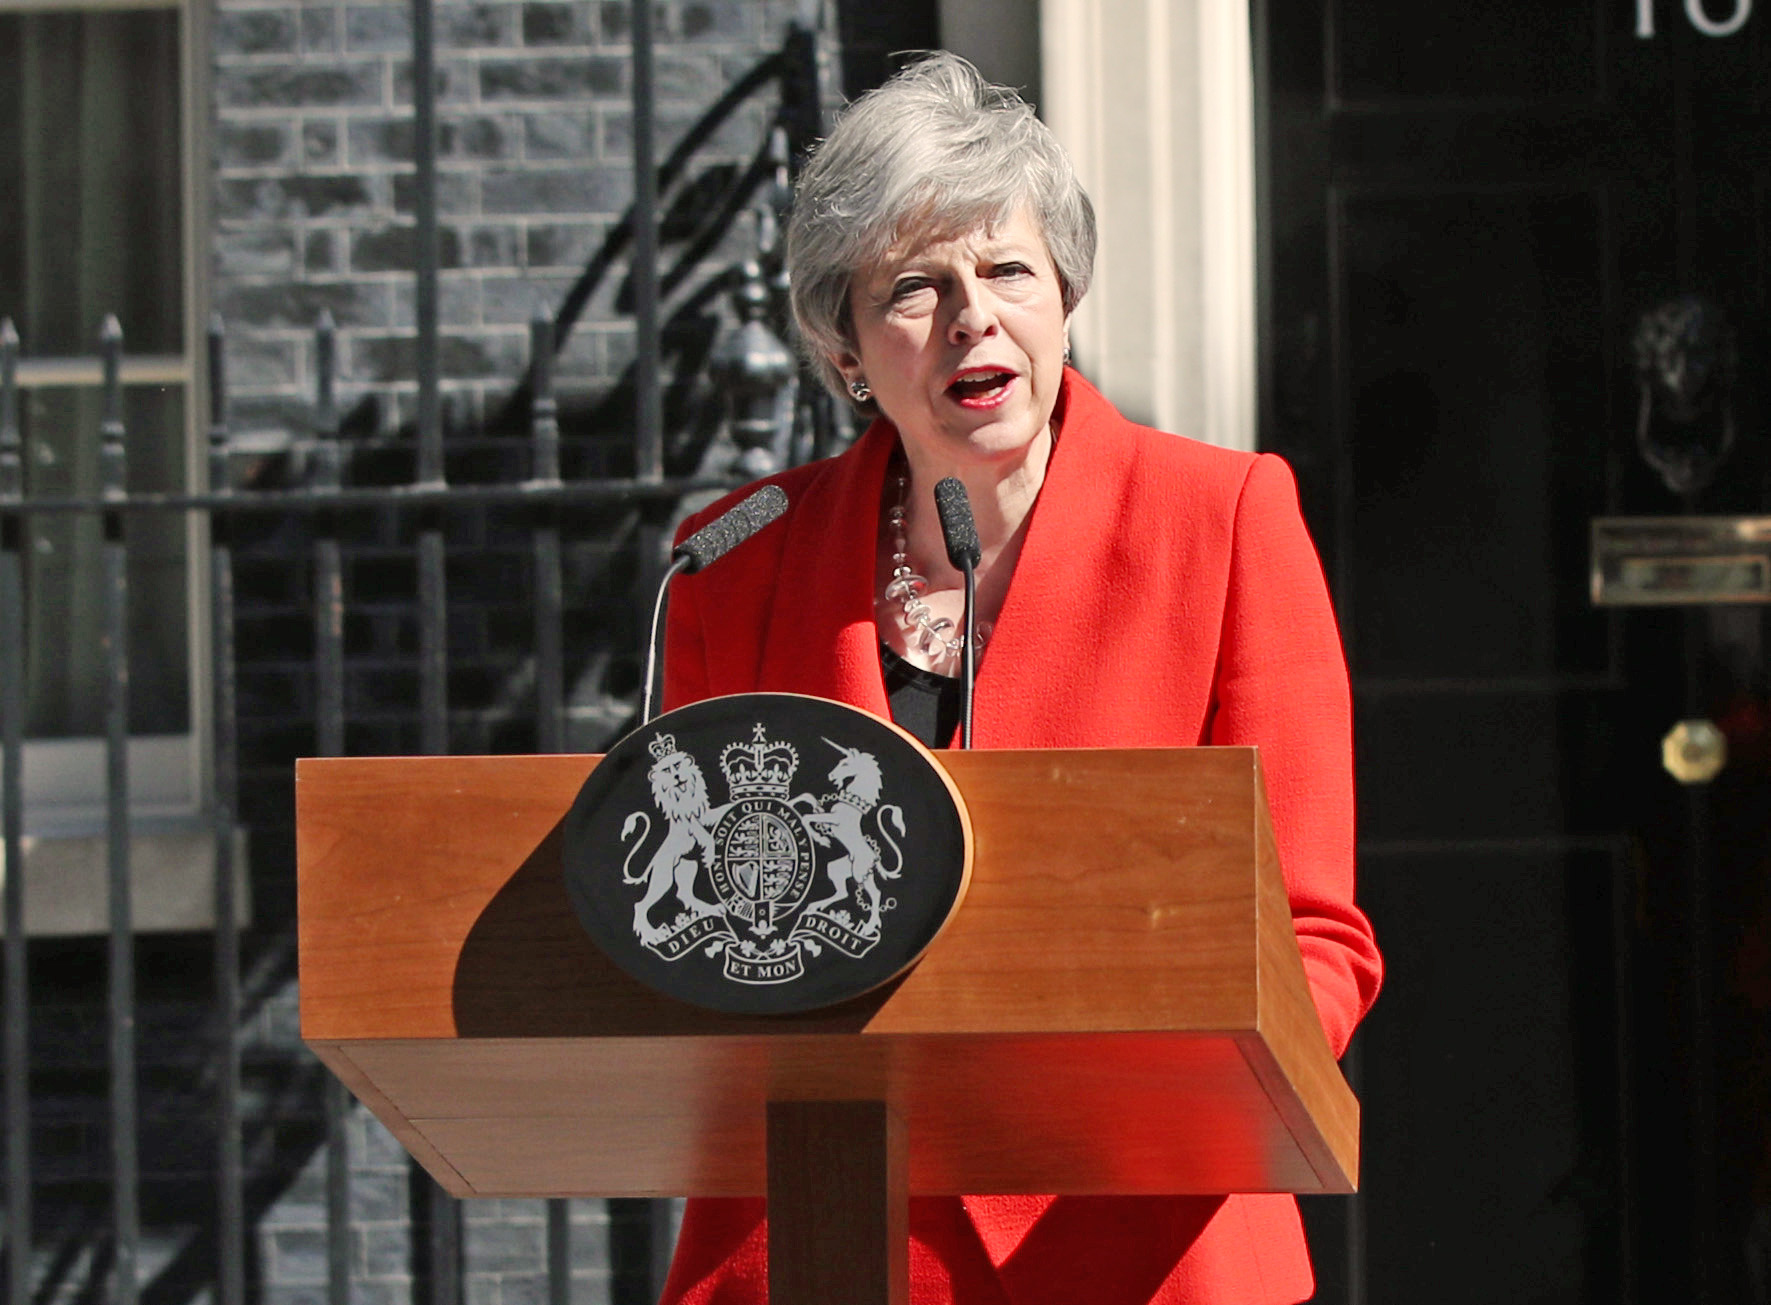 Theresa May was Prime Minister between 2016 and 2019 